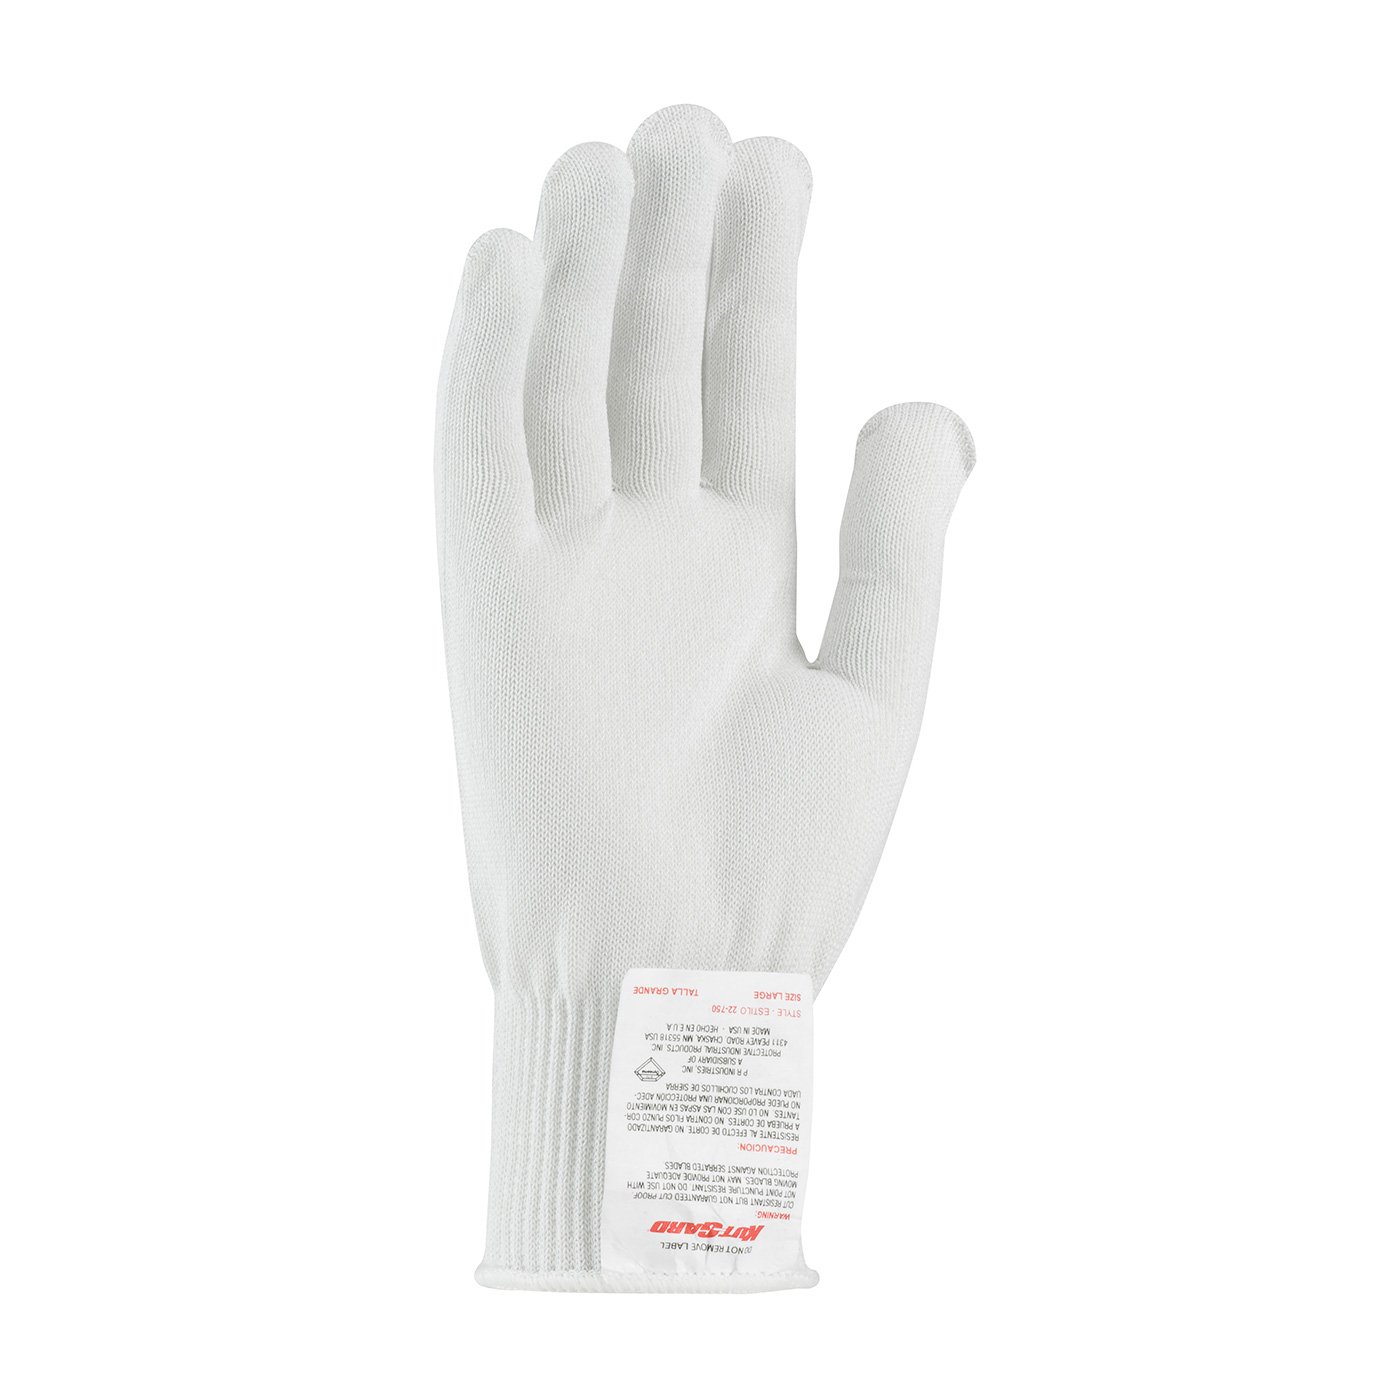 22-760 PIP® white Claw Cover® Seamless Knit Dyneema® Blended Antimicrobial Glove -Medium Weight